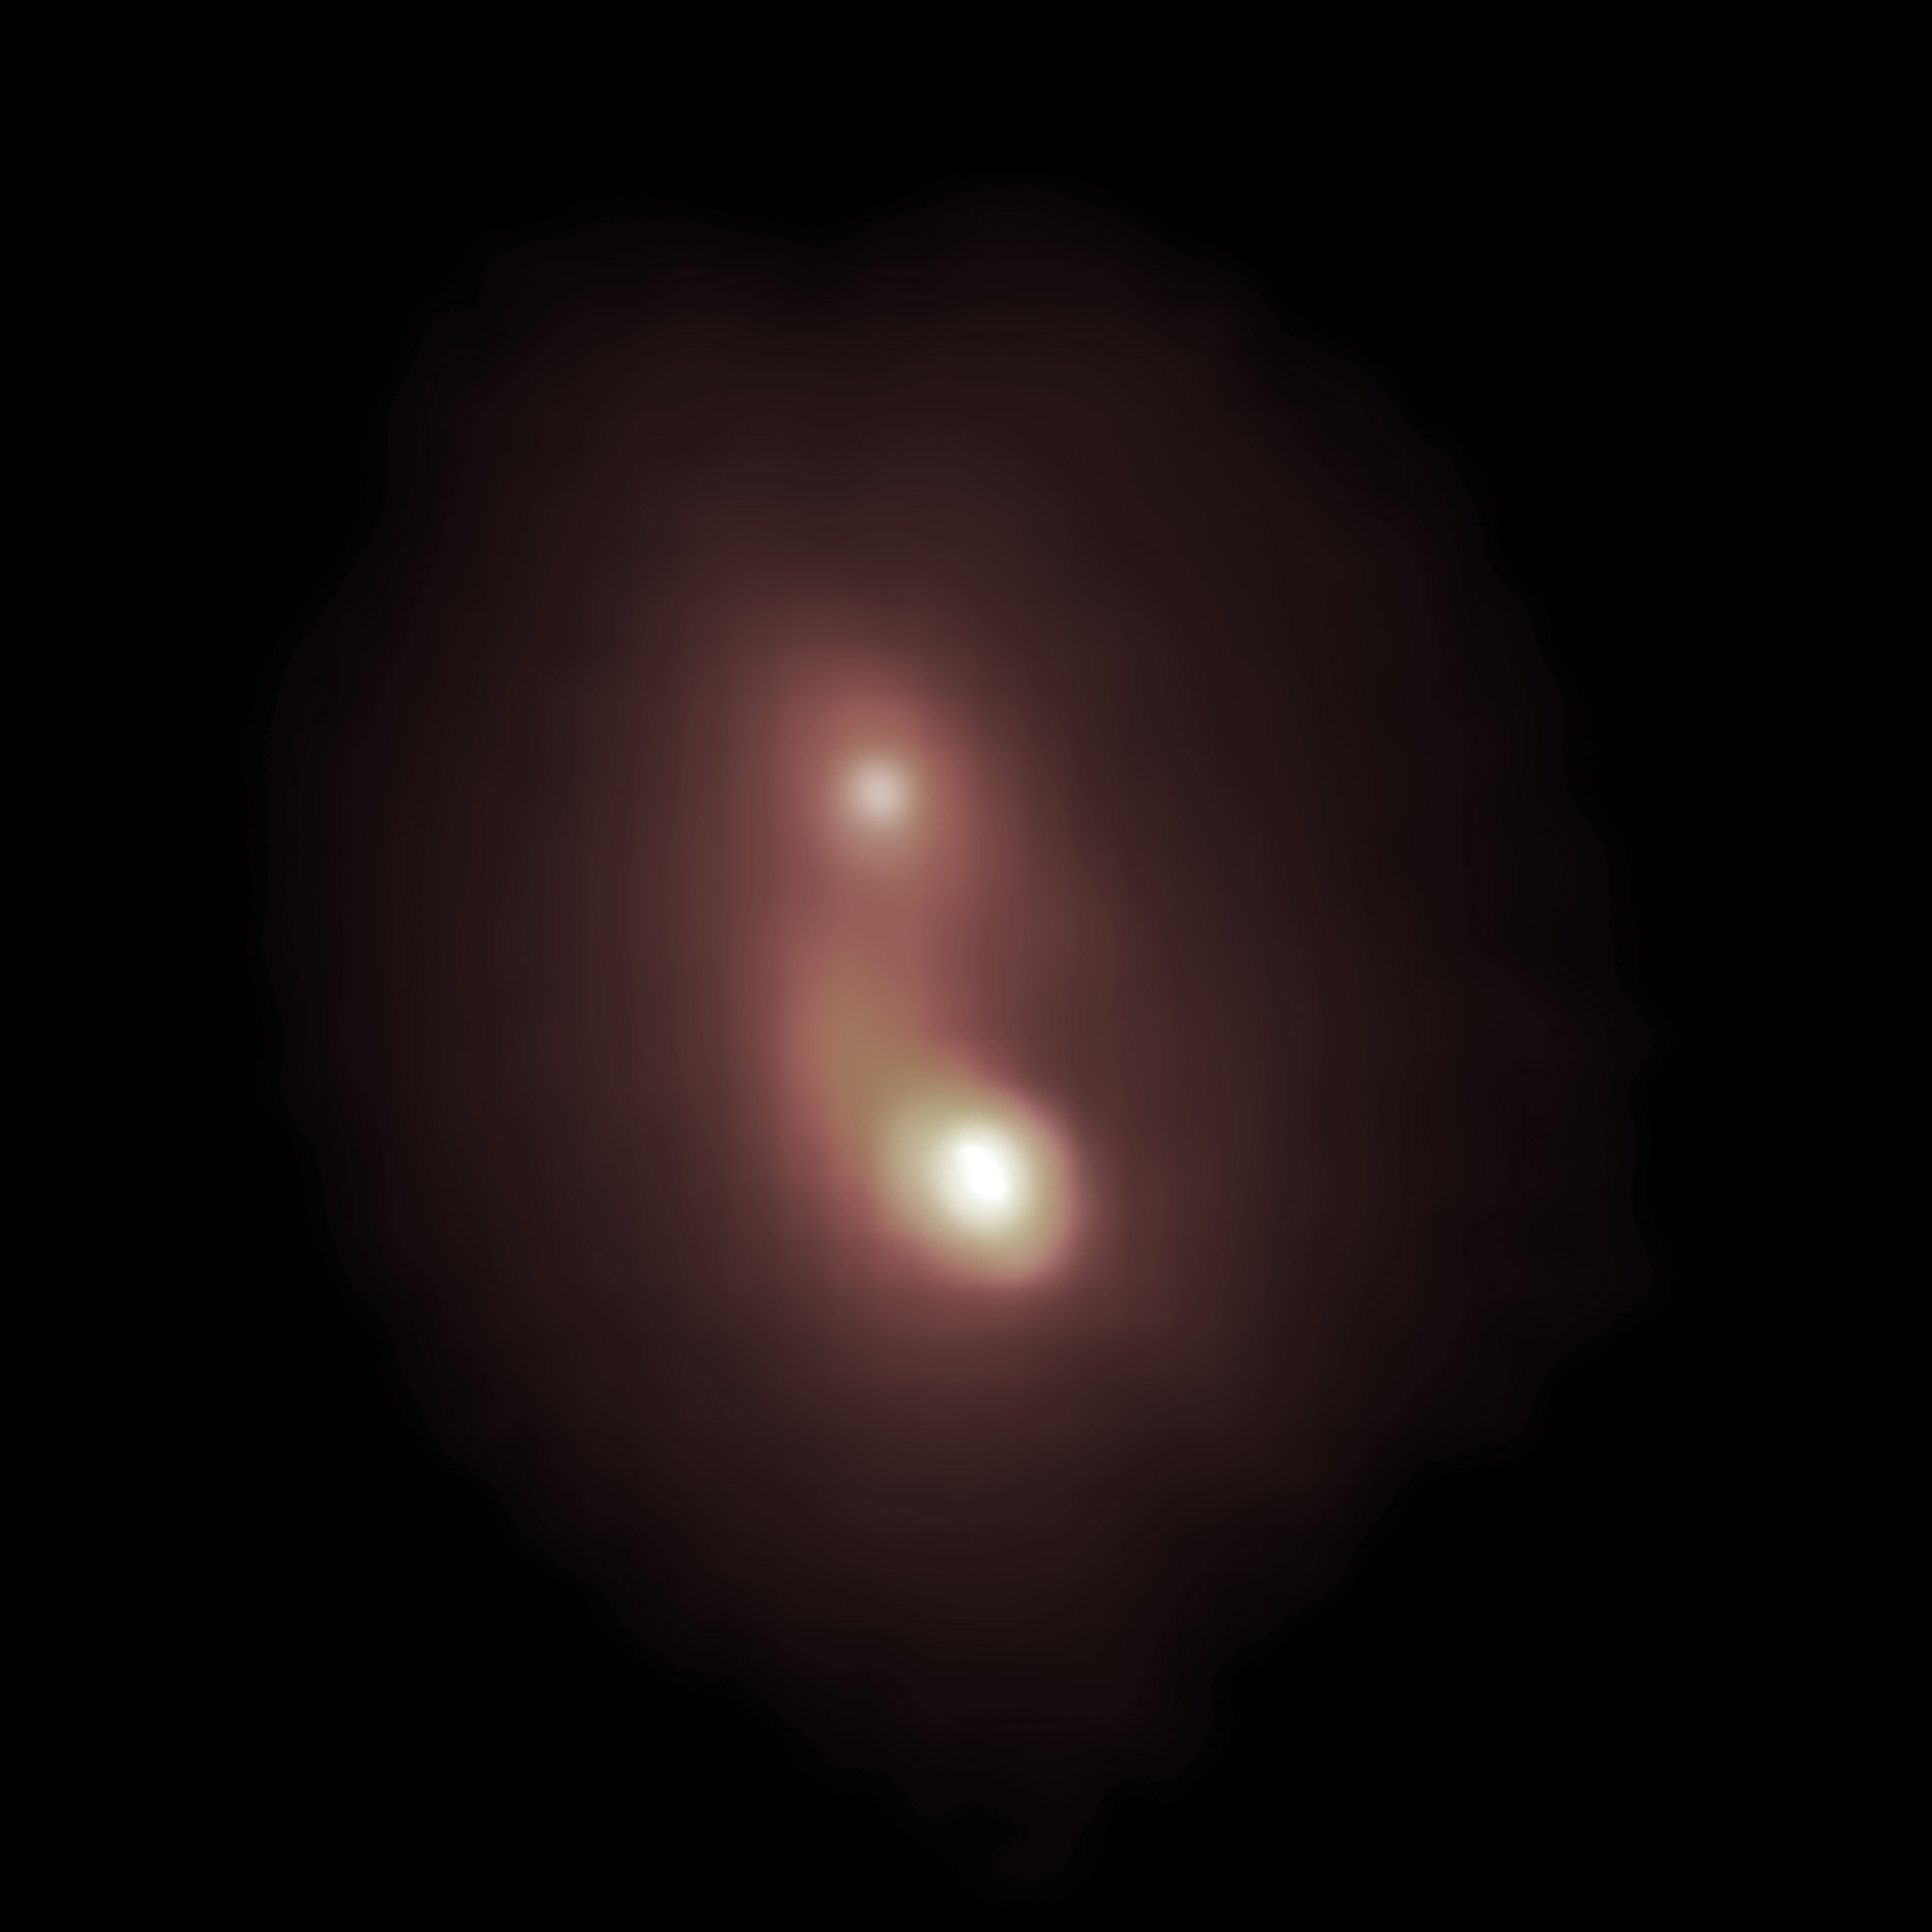 A Pair of Black Holes Dining Together in Nearby Galaxy Merger